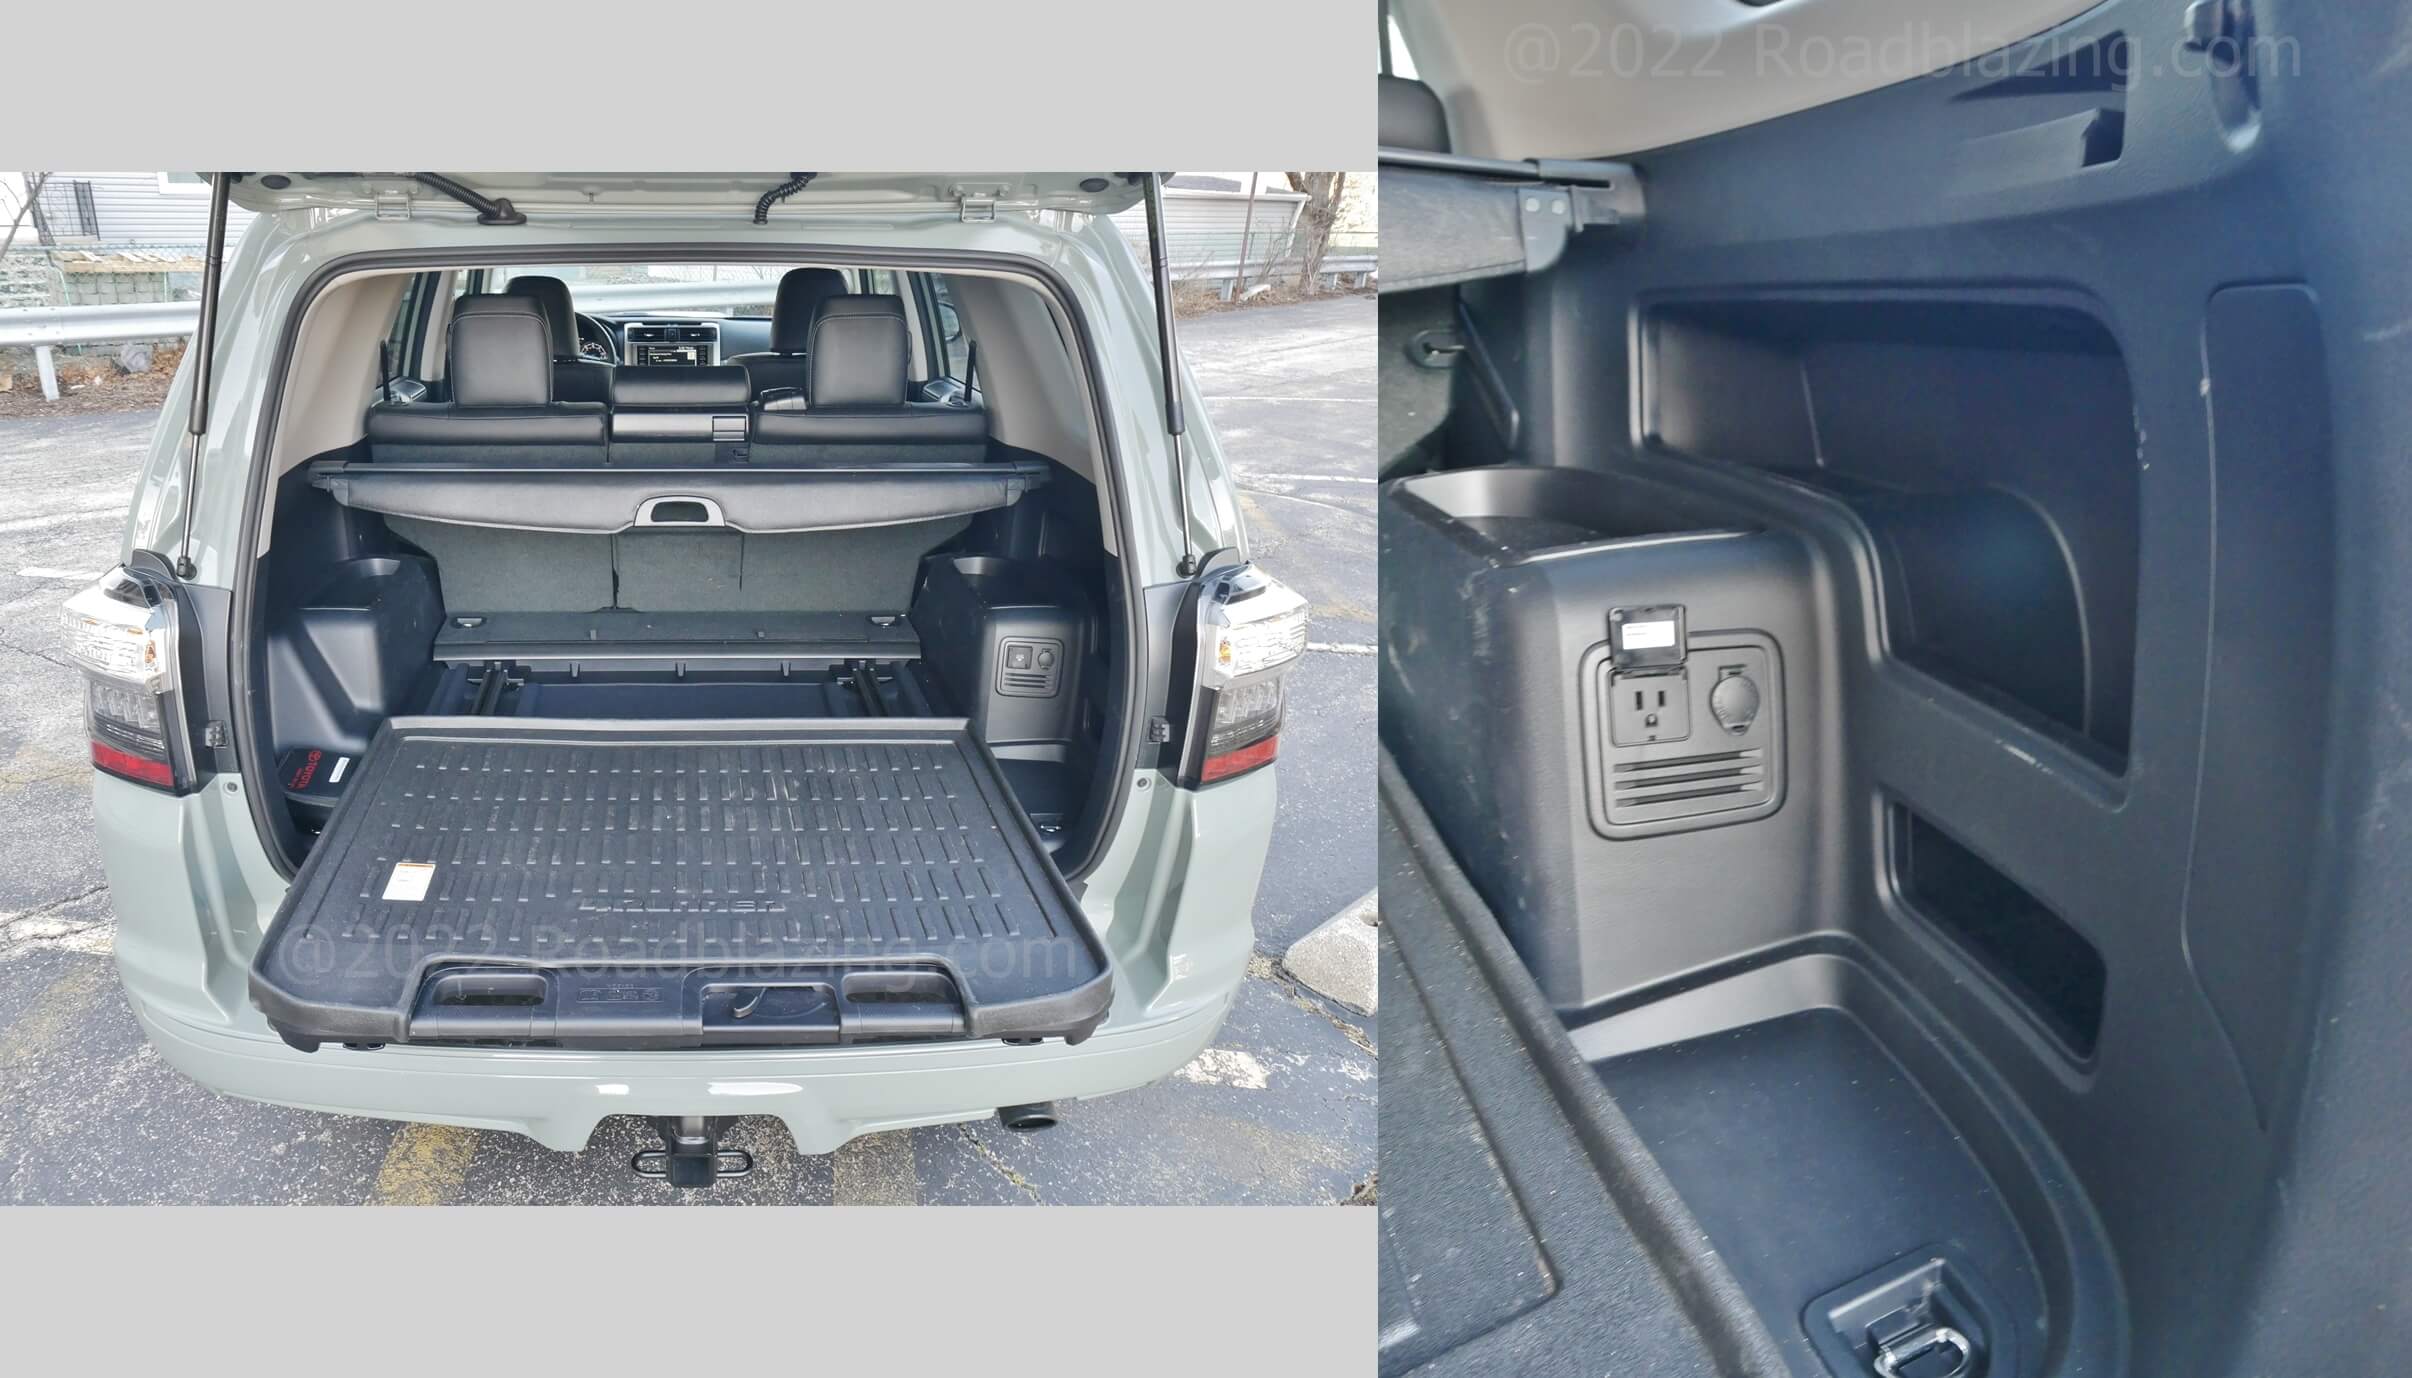 2022 Toyota 4Runner TRD Sport 4x4: slide out cargo loading tray w/ sub floor storage